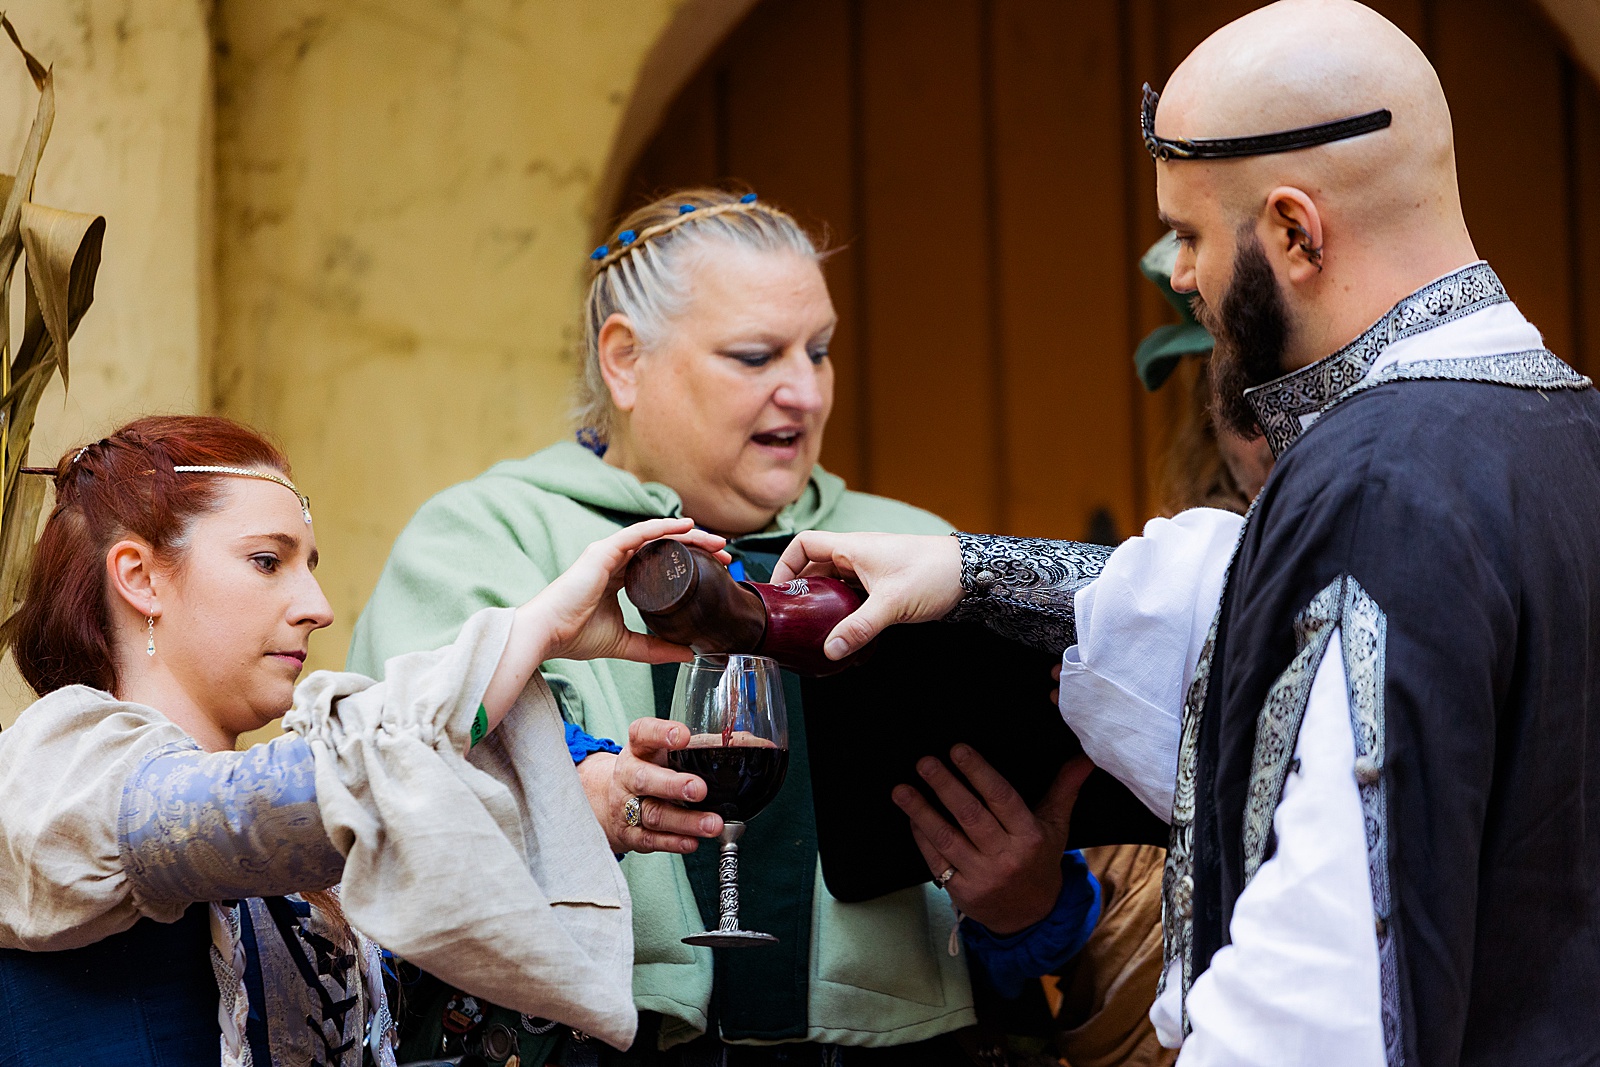 Bride and groom pour wine into a glass at a renaissance festival wedding.